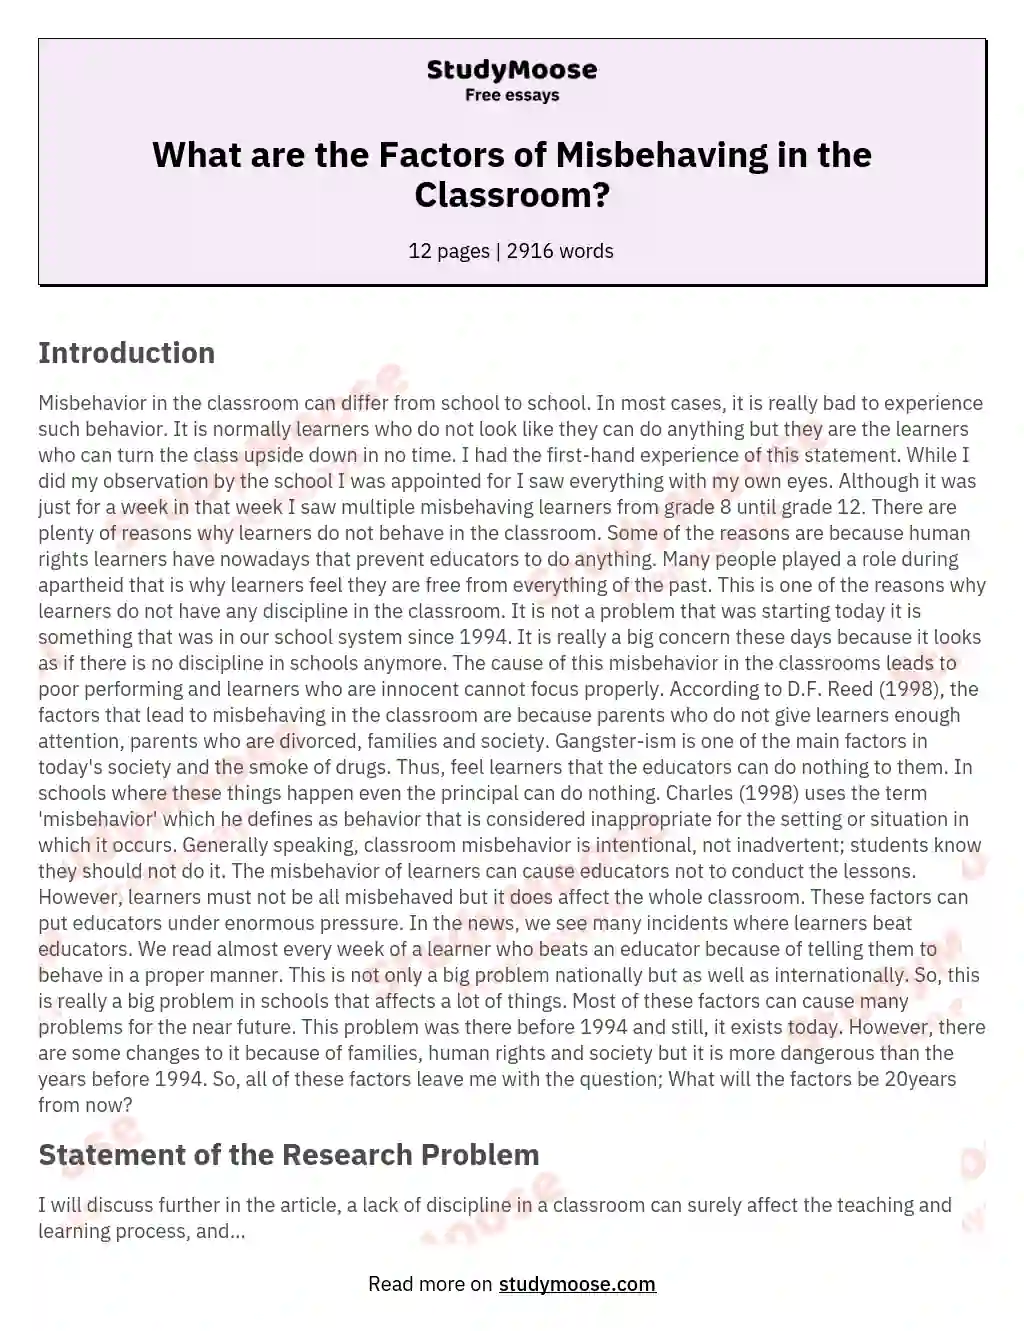 essay topic for misbehaving students